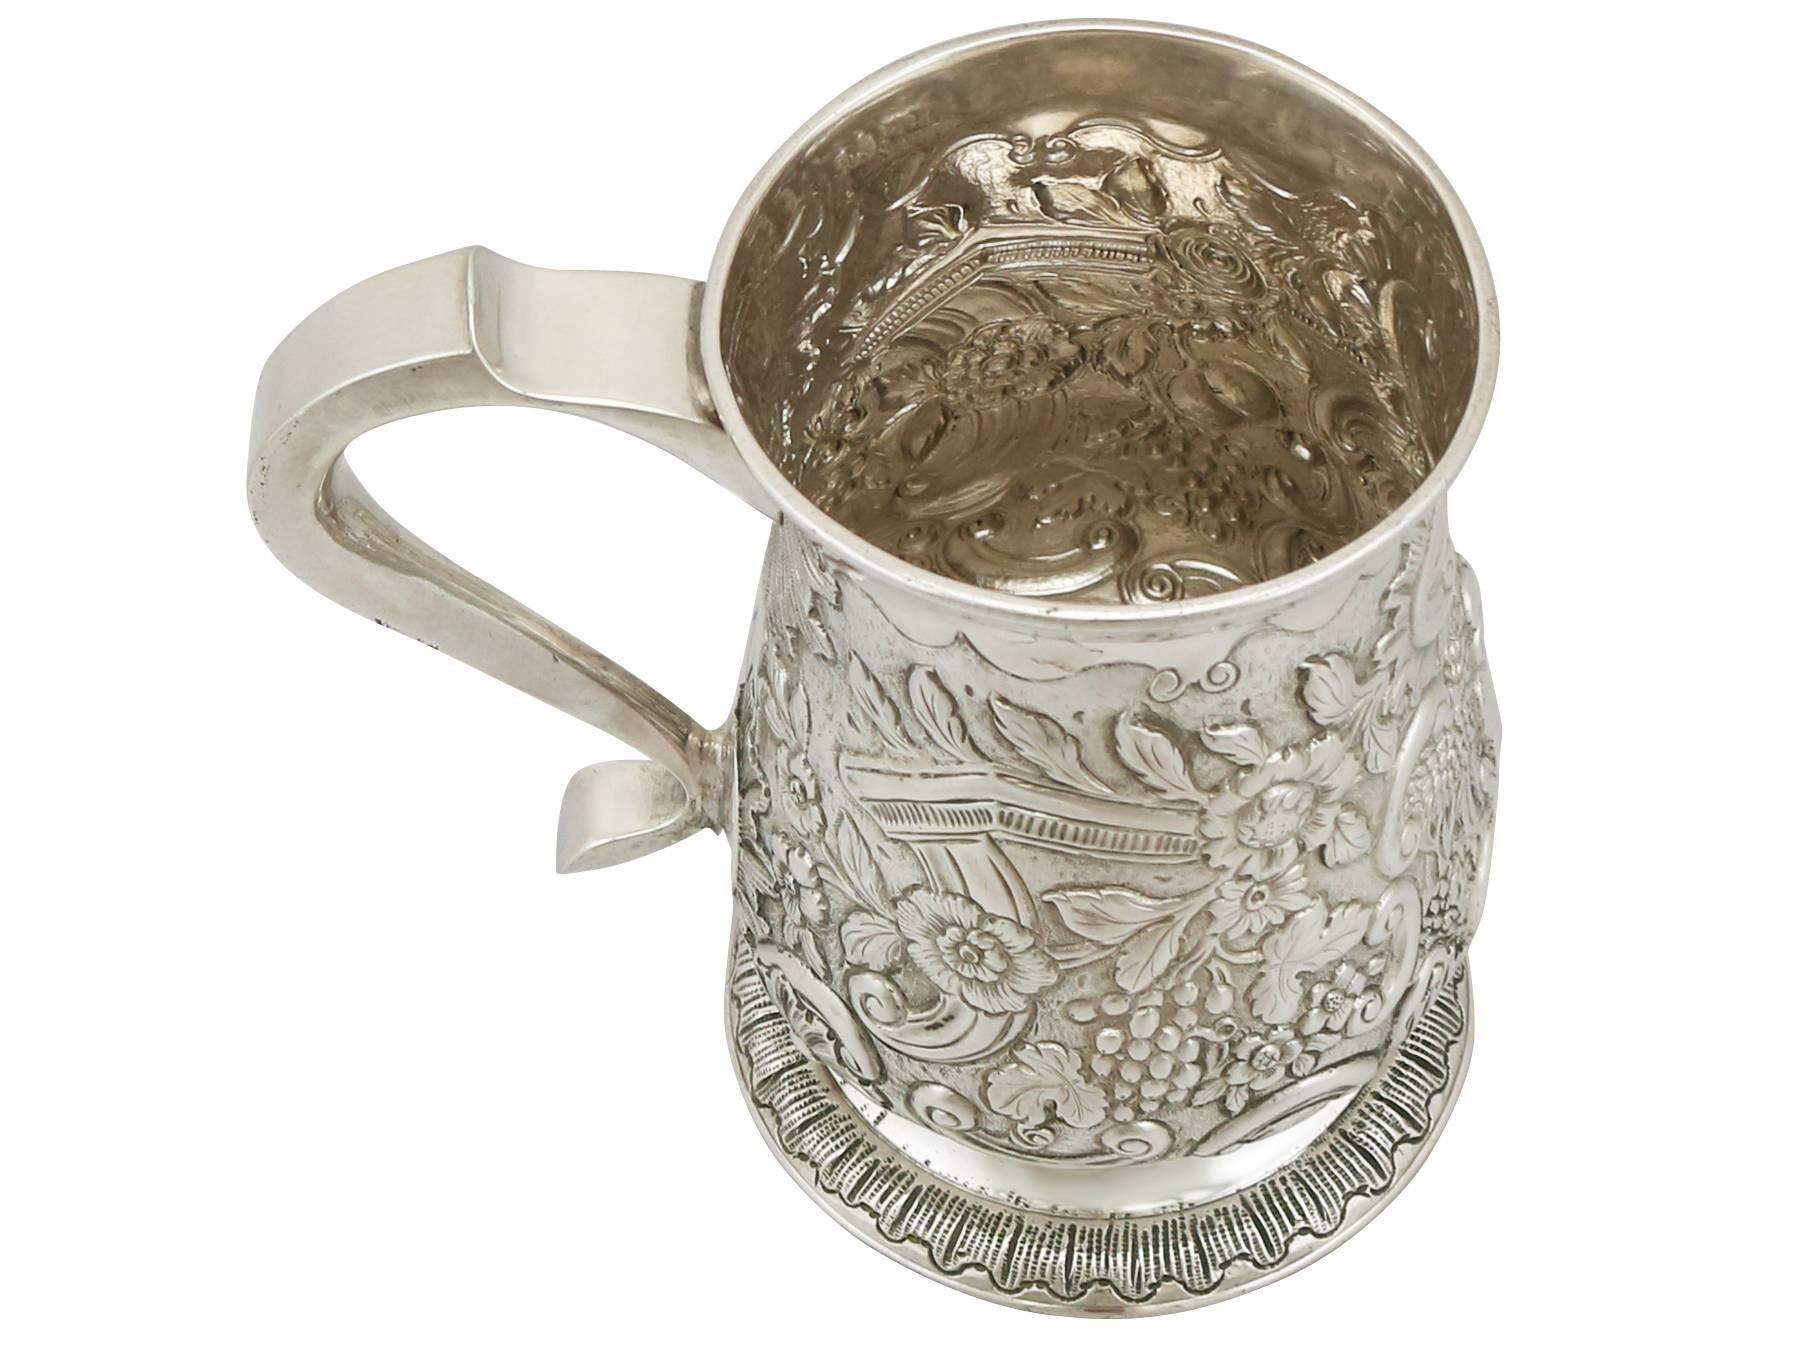 A fine and impressive antique George II sterling silver mug made by John Langlands I; an addition to our range of Georgian silverware collection

This fine antique George II solid silver pint mug has a plain baluster shaped form onto a circular